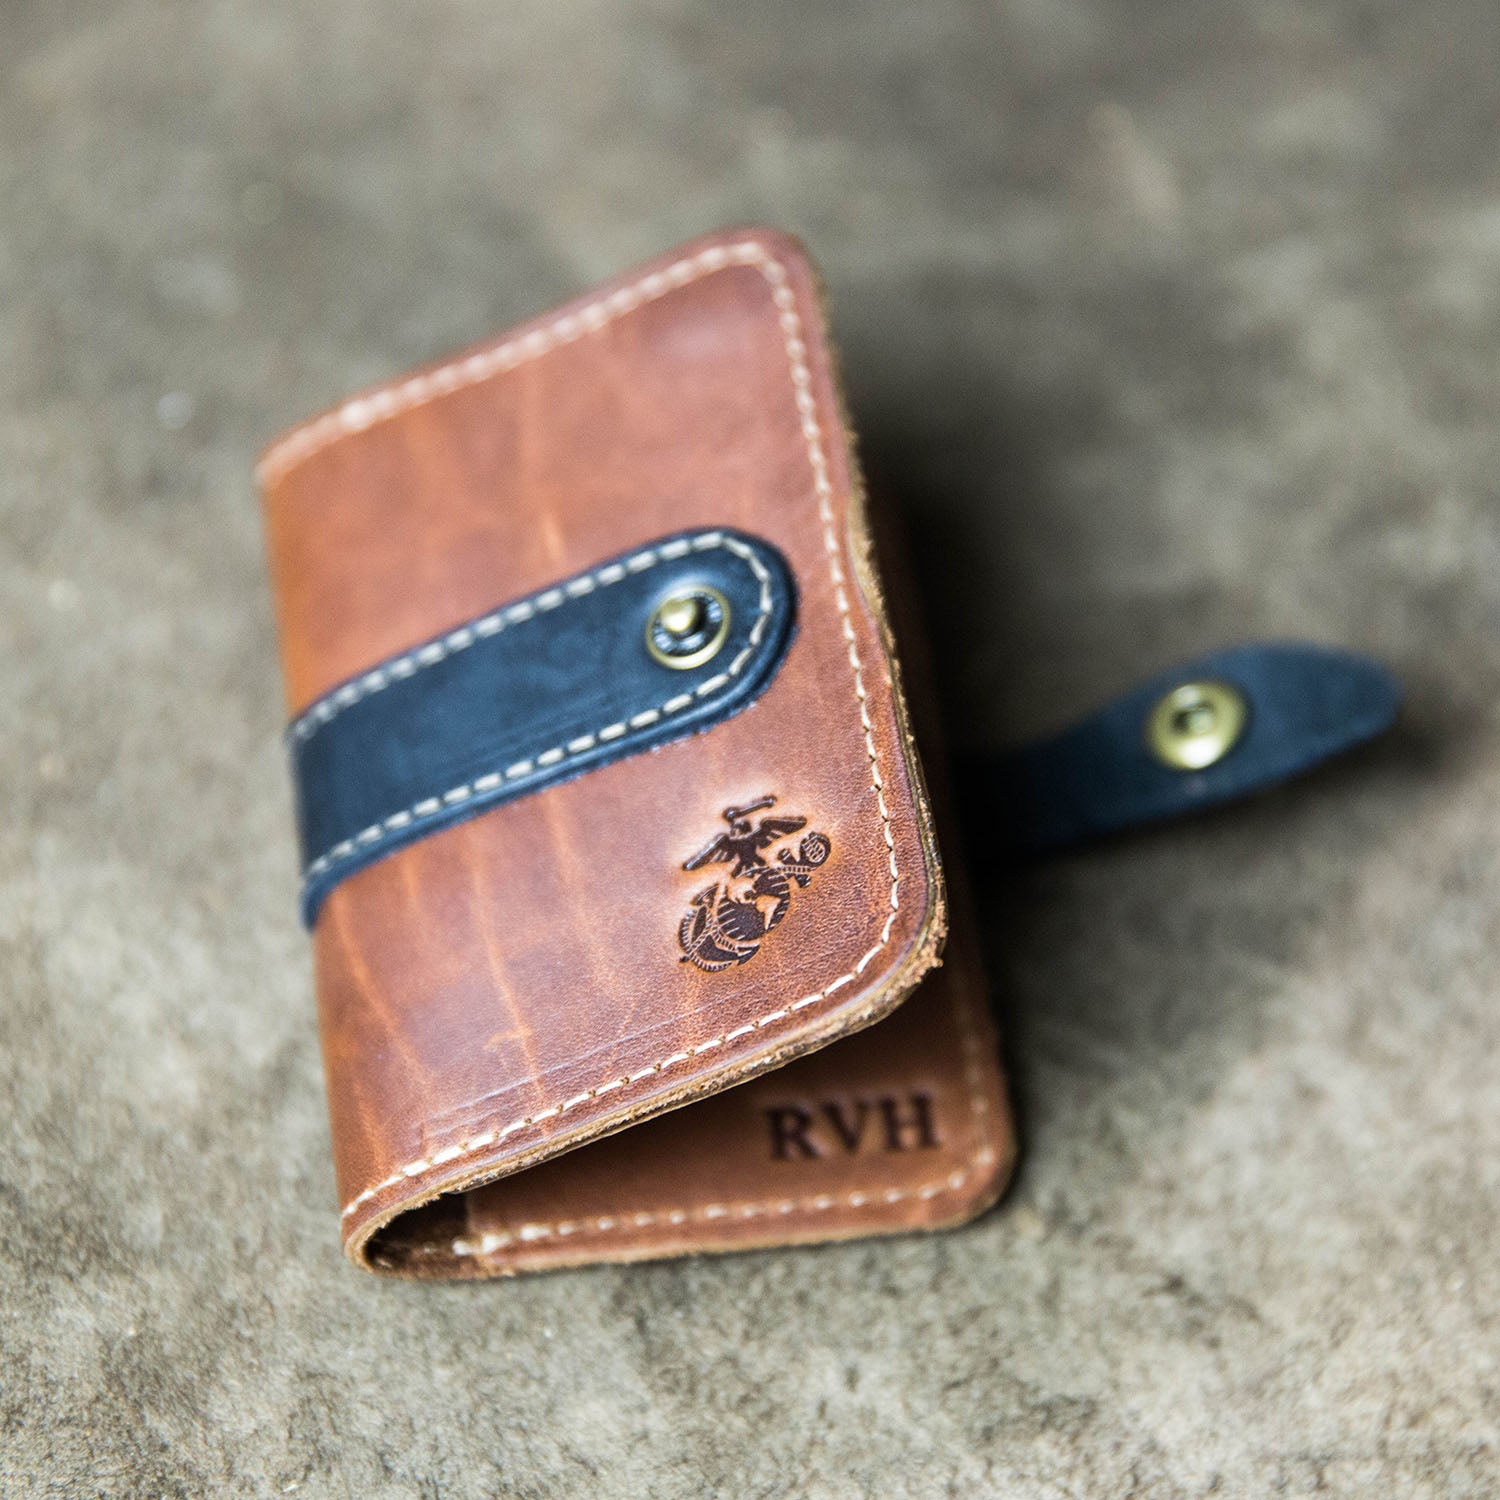 Fine leather snap closure bifold wallet with personalized initials and marine corps logo